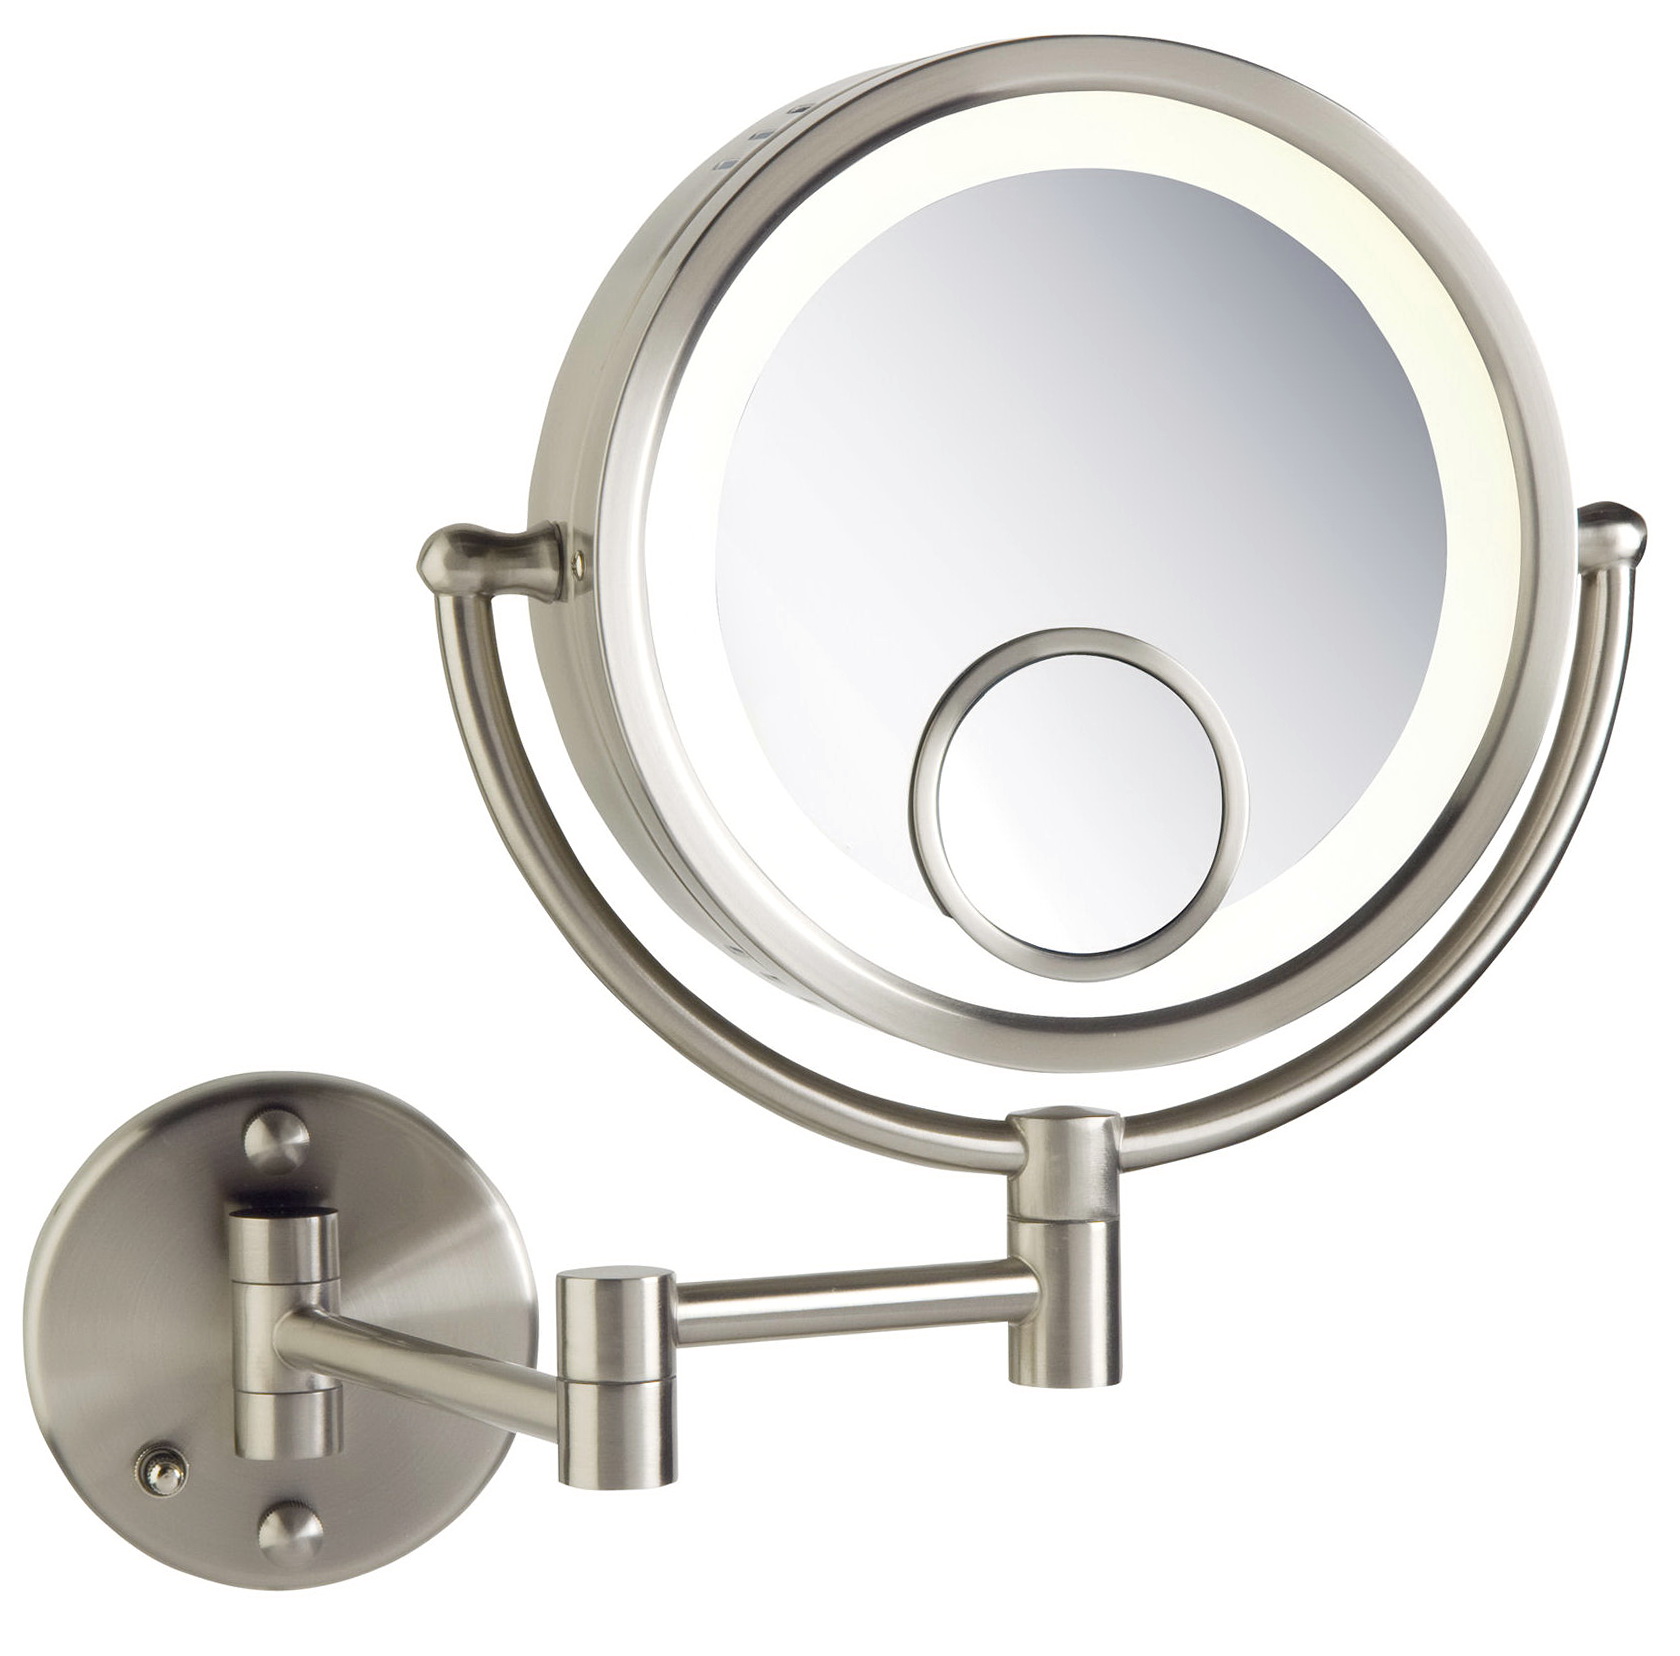 Lighted Wall Mount Magnifying Makeup Mirror Fresh Wall Lights Elegant Best <a href='/wall-mounted-makeup-mirror/'>Wall Mounted Makeup Mirror</a> Lighted High | Spagic